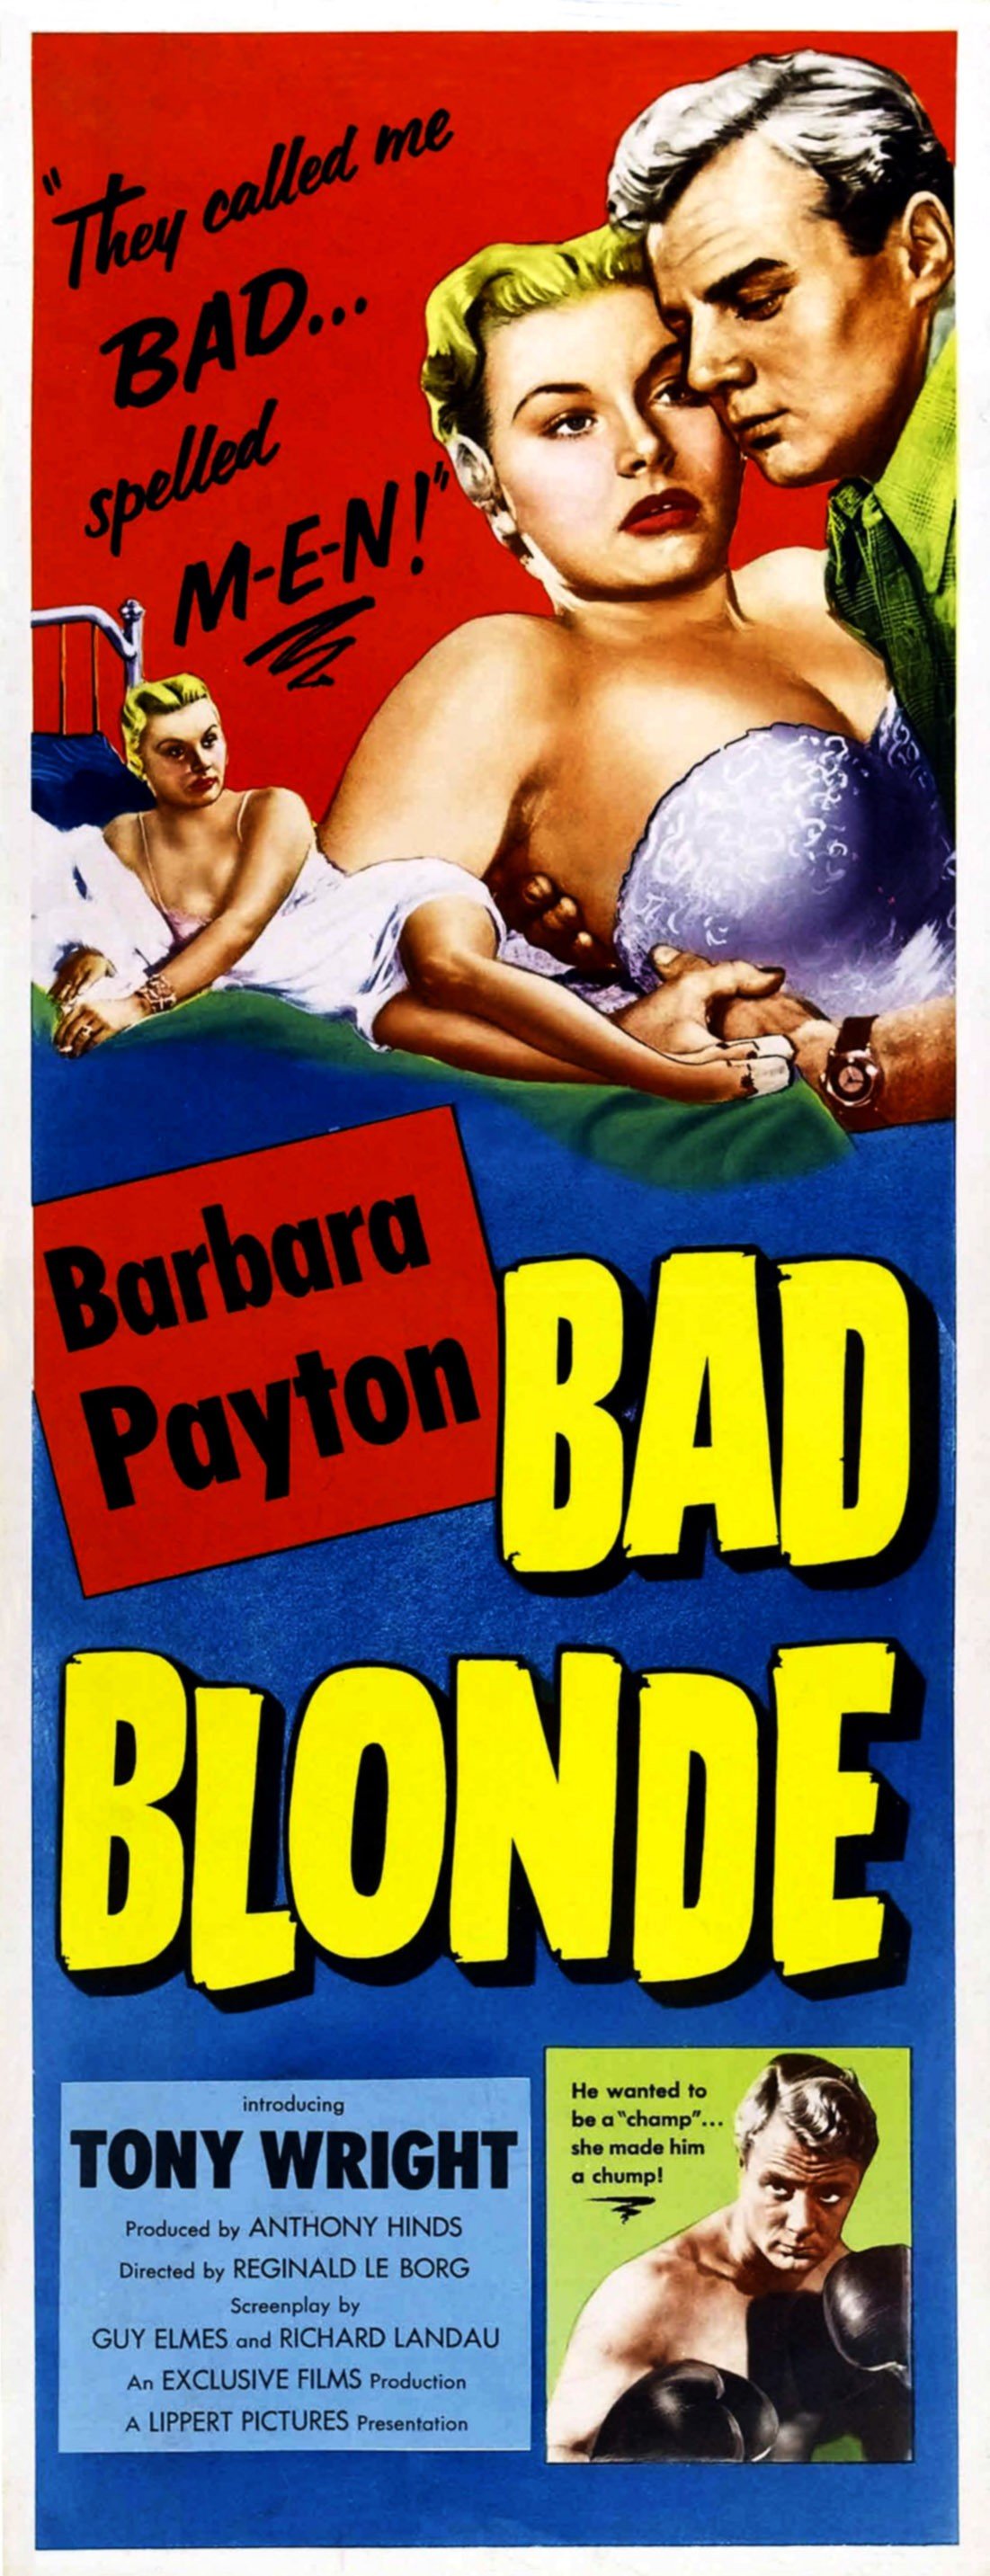 Movie poster for the movie "Bad Blonde" in which Barbara Payton had a starring role, 1953 | Photo: Getty Images 